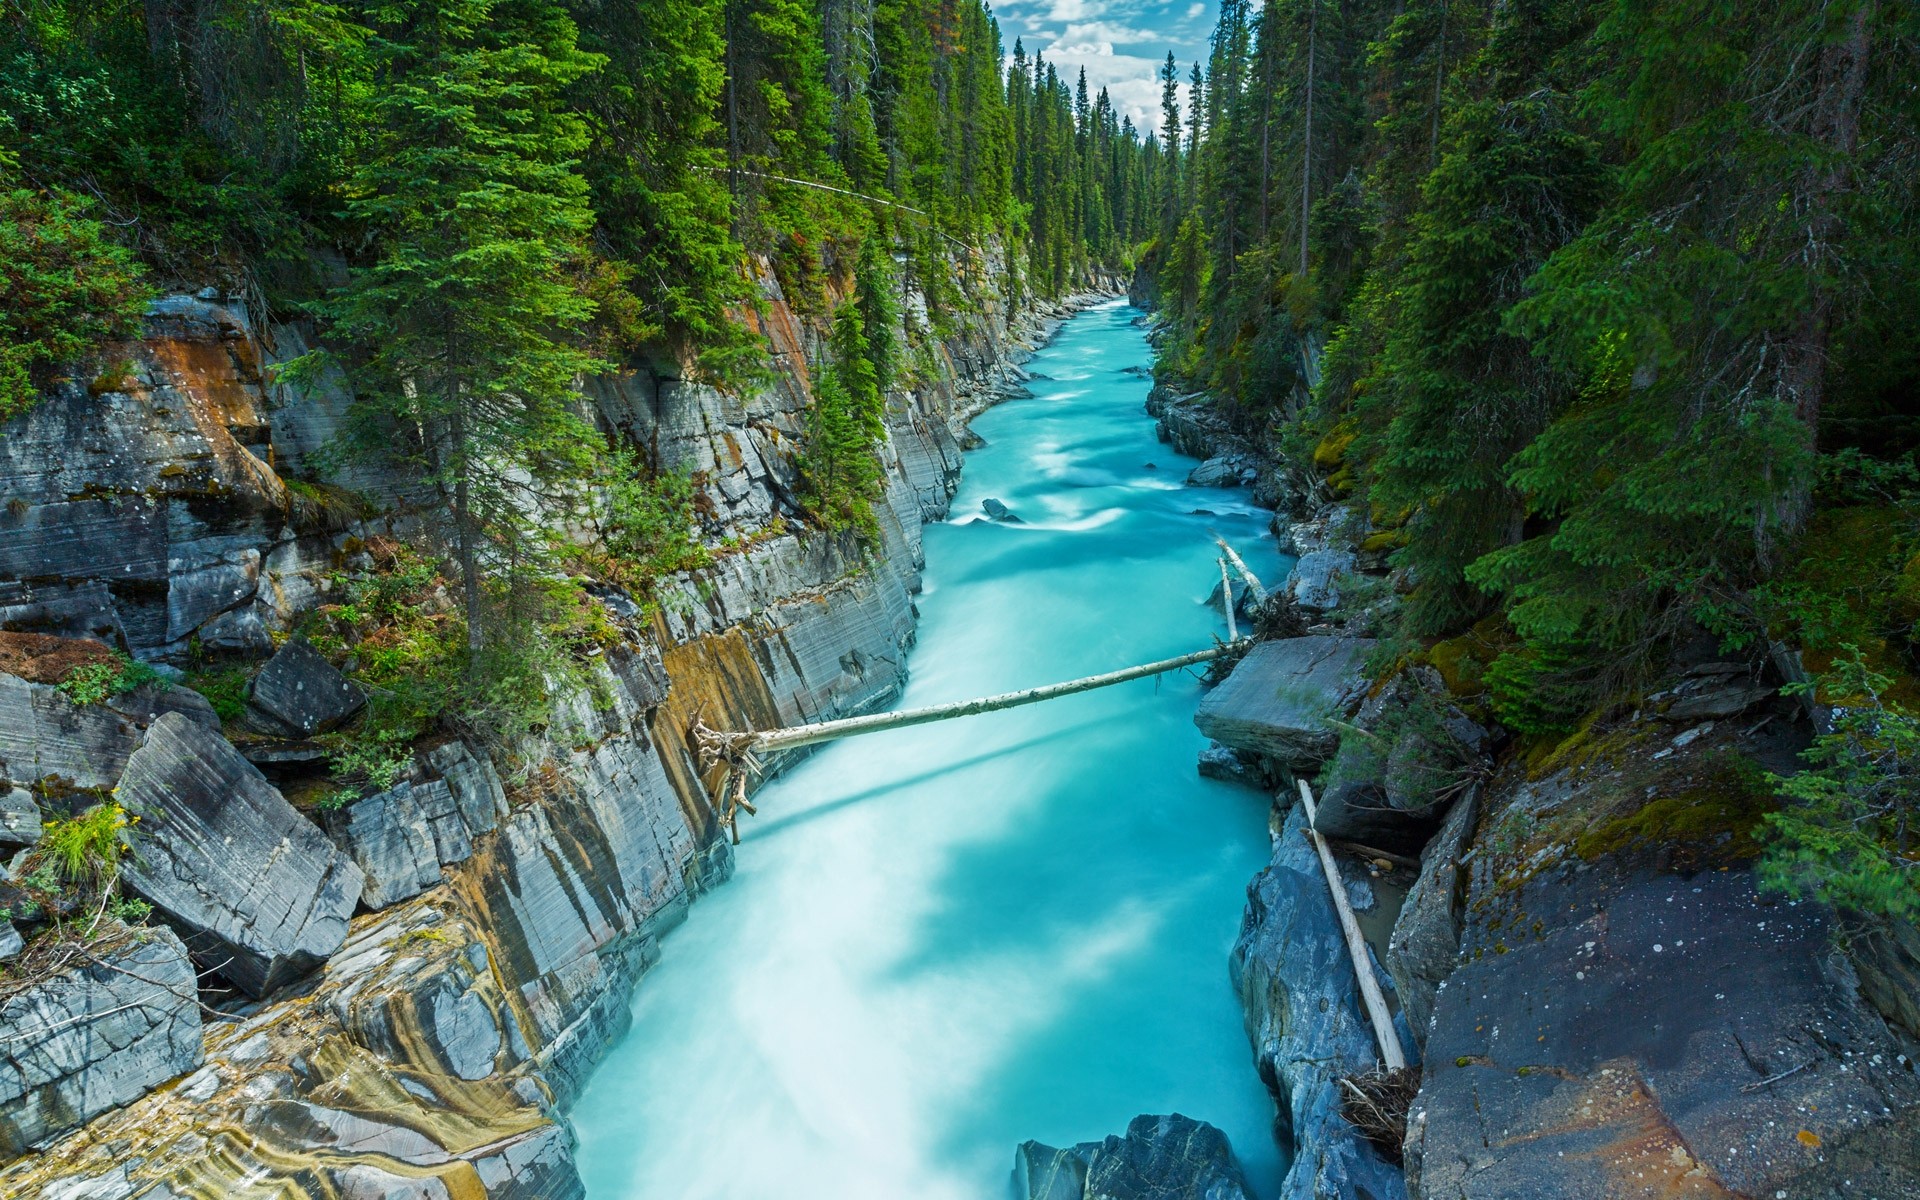 General 1920x1200 nature landscape Canada forest river trees turquoise gorge rocks rocks wall British Columbia